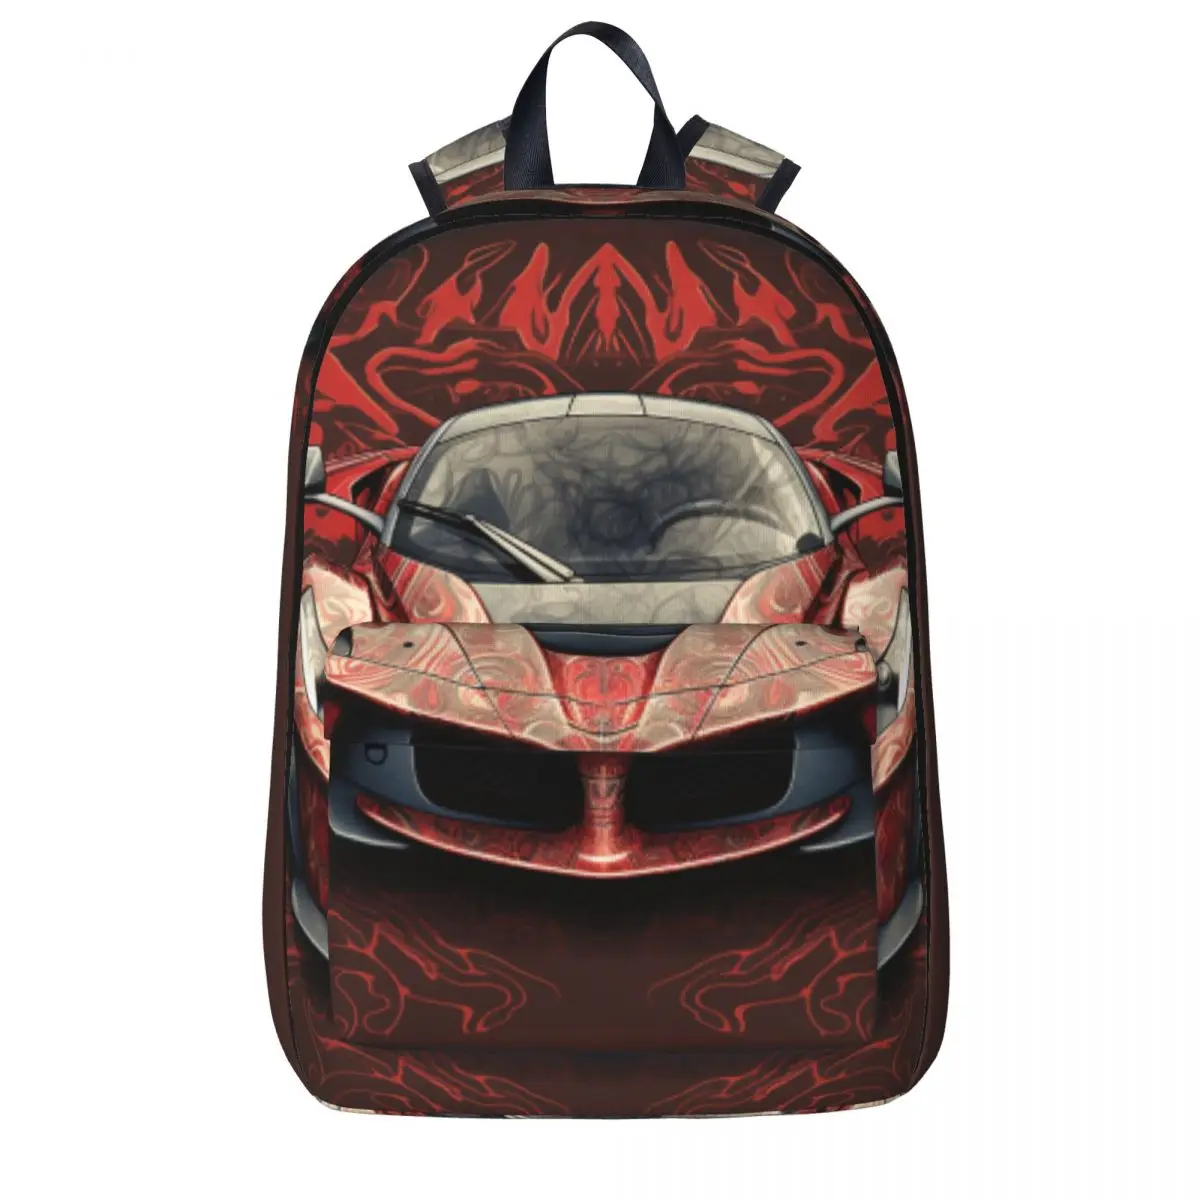 

Passionate Sports Car Backpack Wall Graffiti Various Styles Workout Backpacks Men Cute School Bags High Quality Large Rucksack